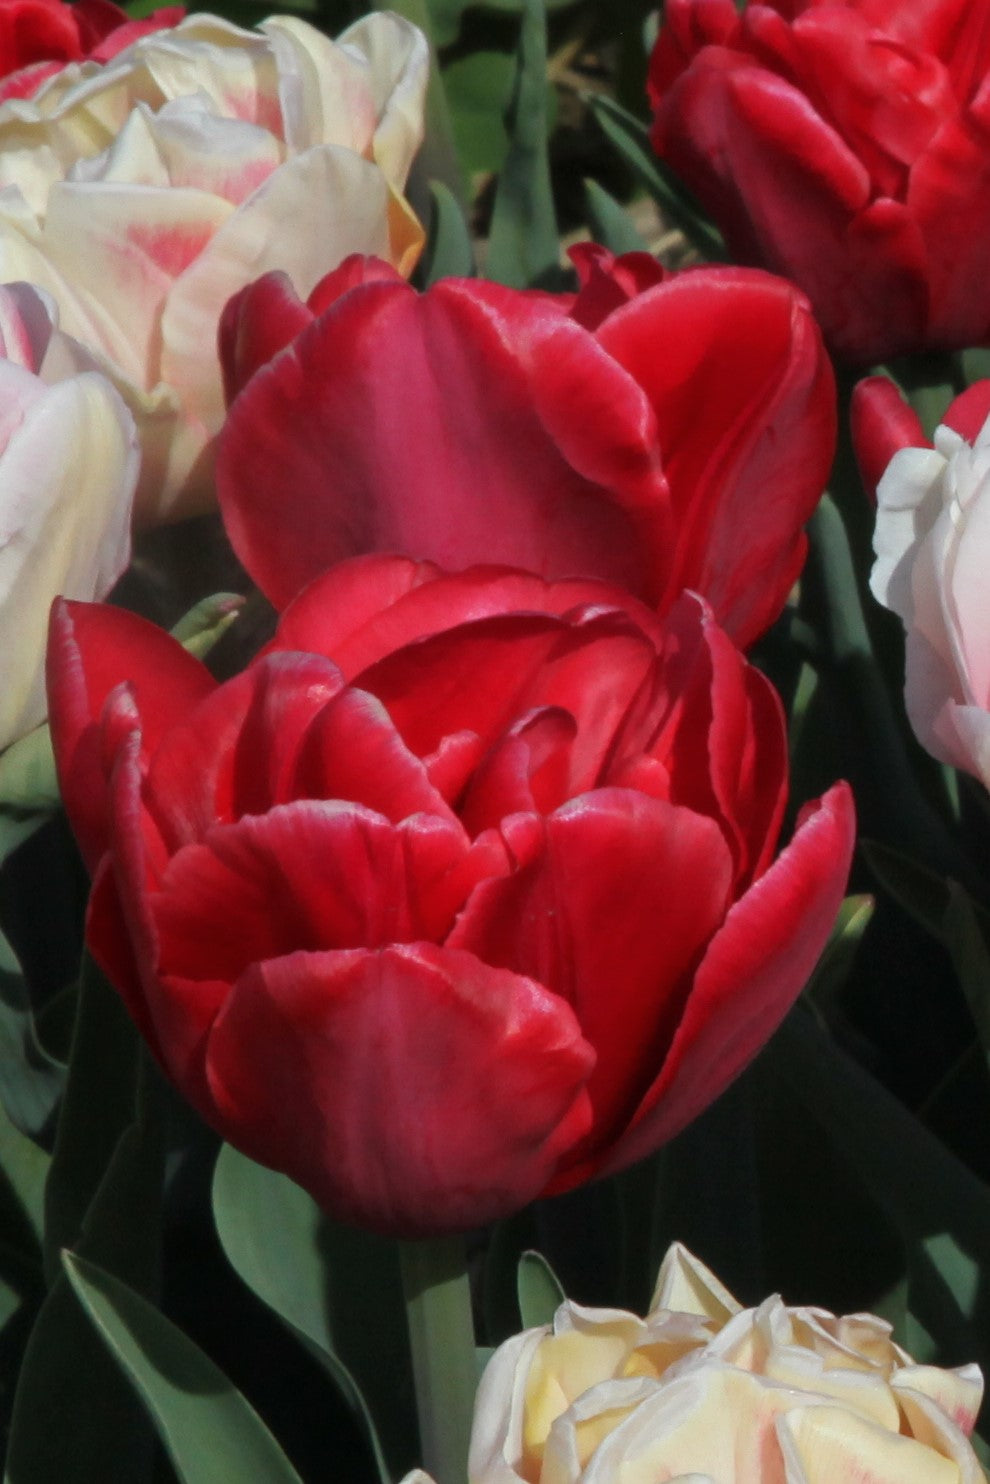 Close-up of Double late tulip Red Foxtrot, with its red shiny petals